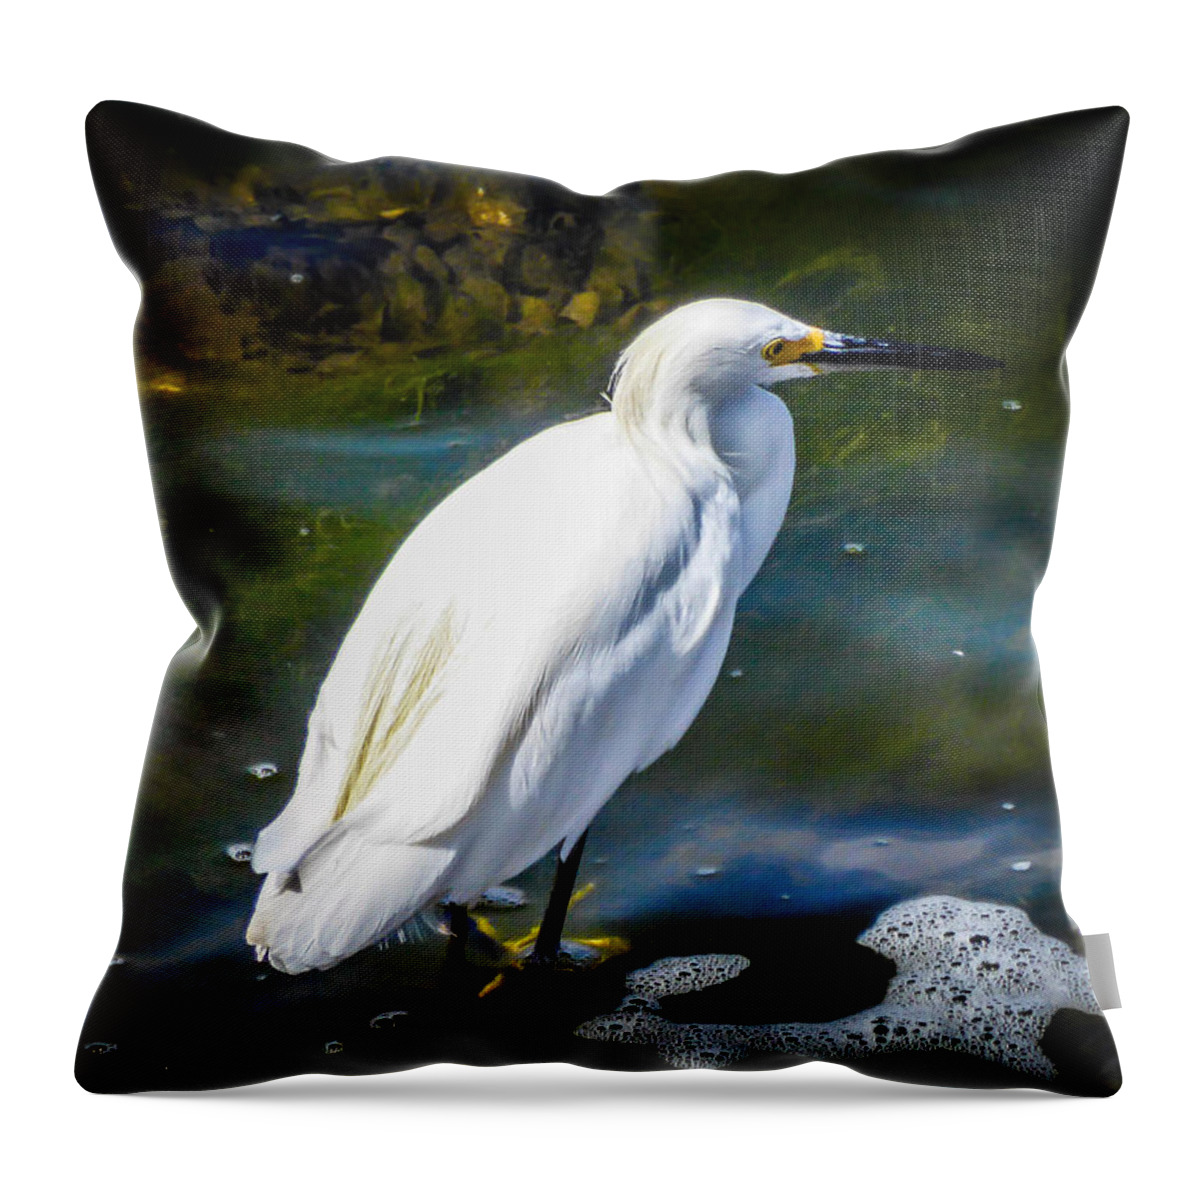 Snowy Egret Throw Pillow featuring the photograph Snowy Egret by Pamela Newcomb